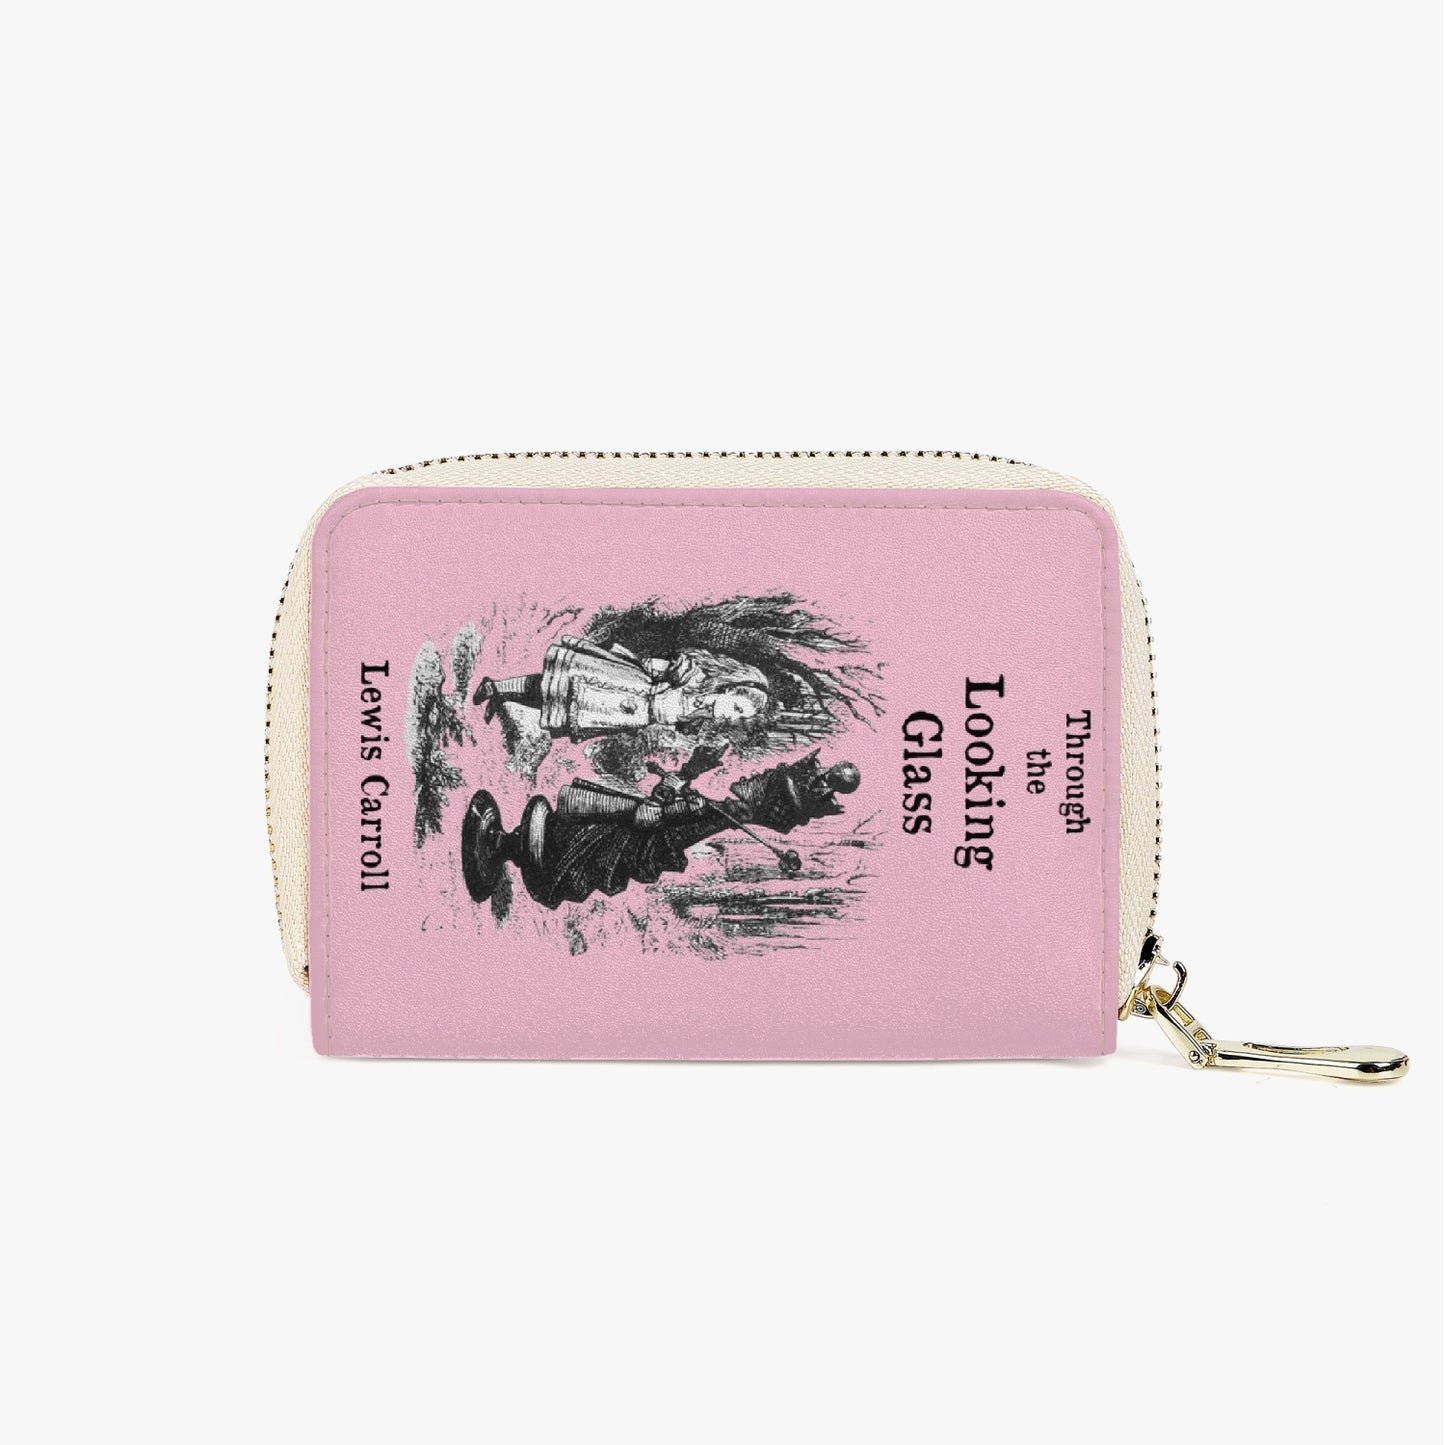 Alice in Wonderland Pink Card Holder Wallet - Through the Looking Glass Purse (JPLCPINK)